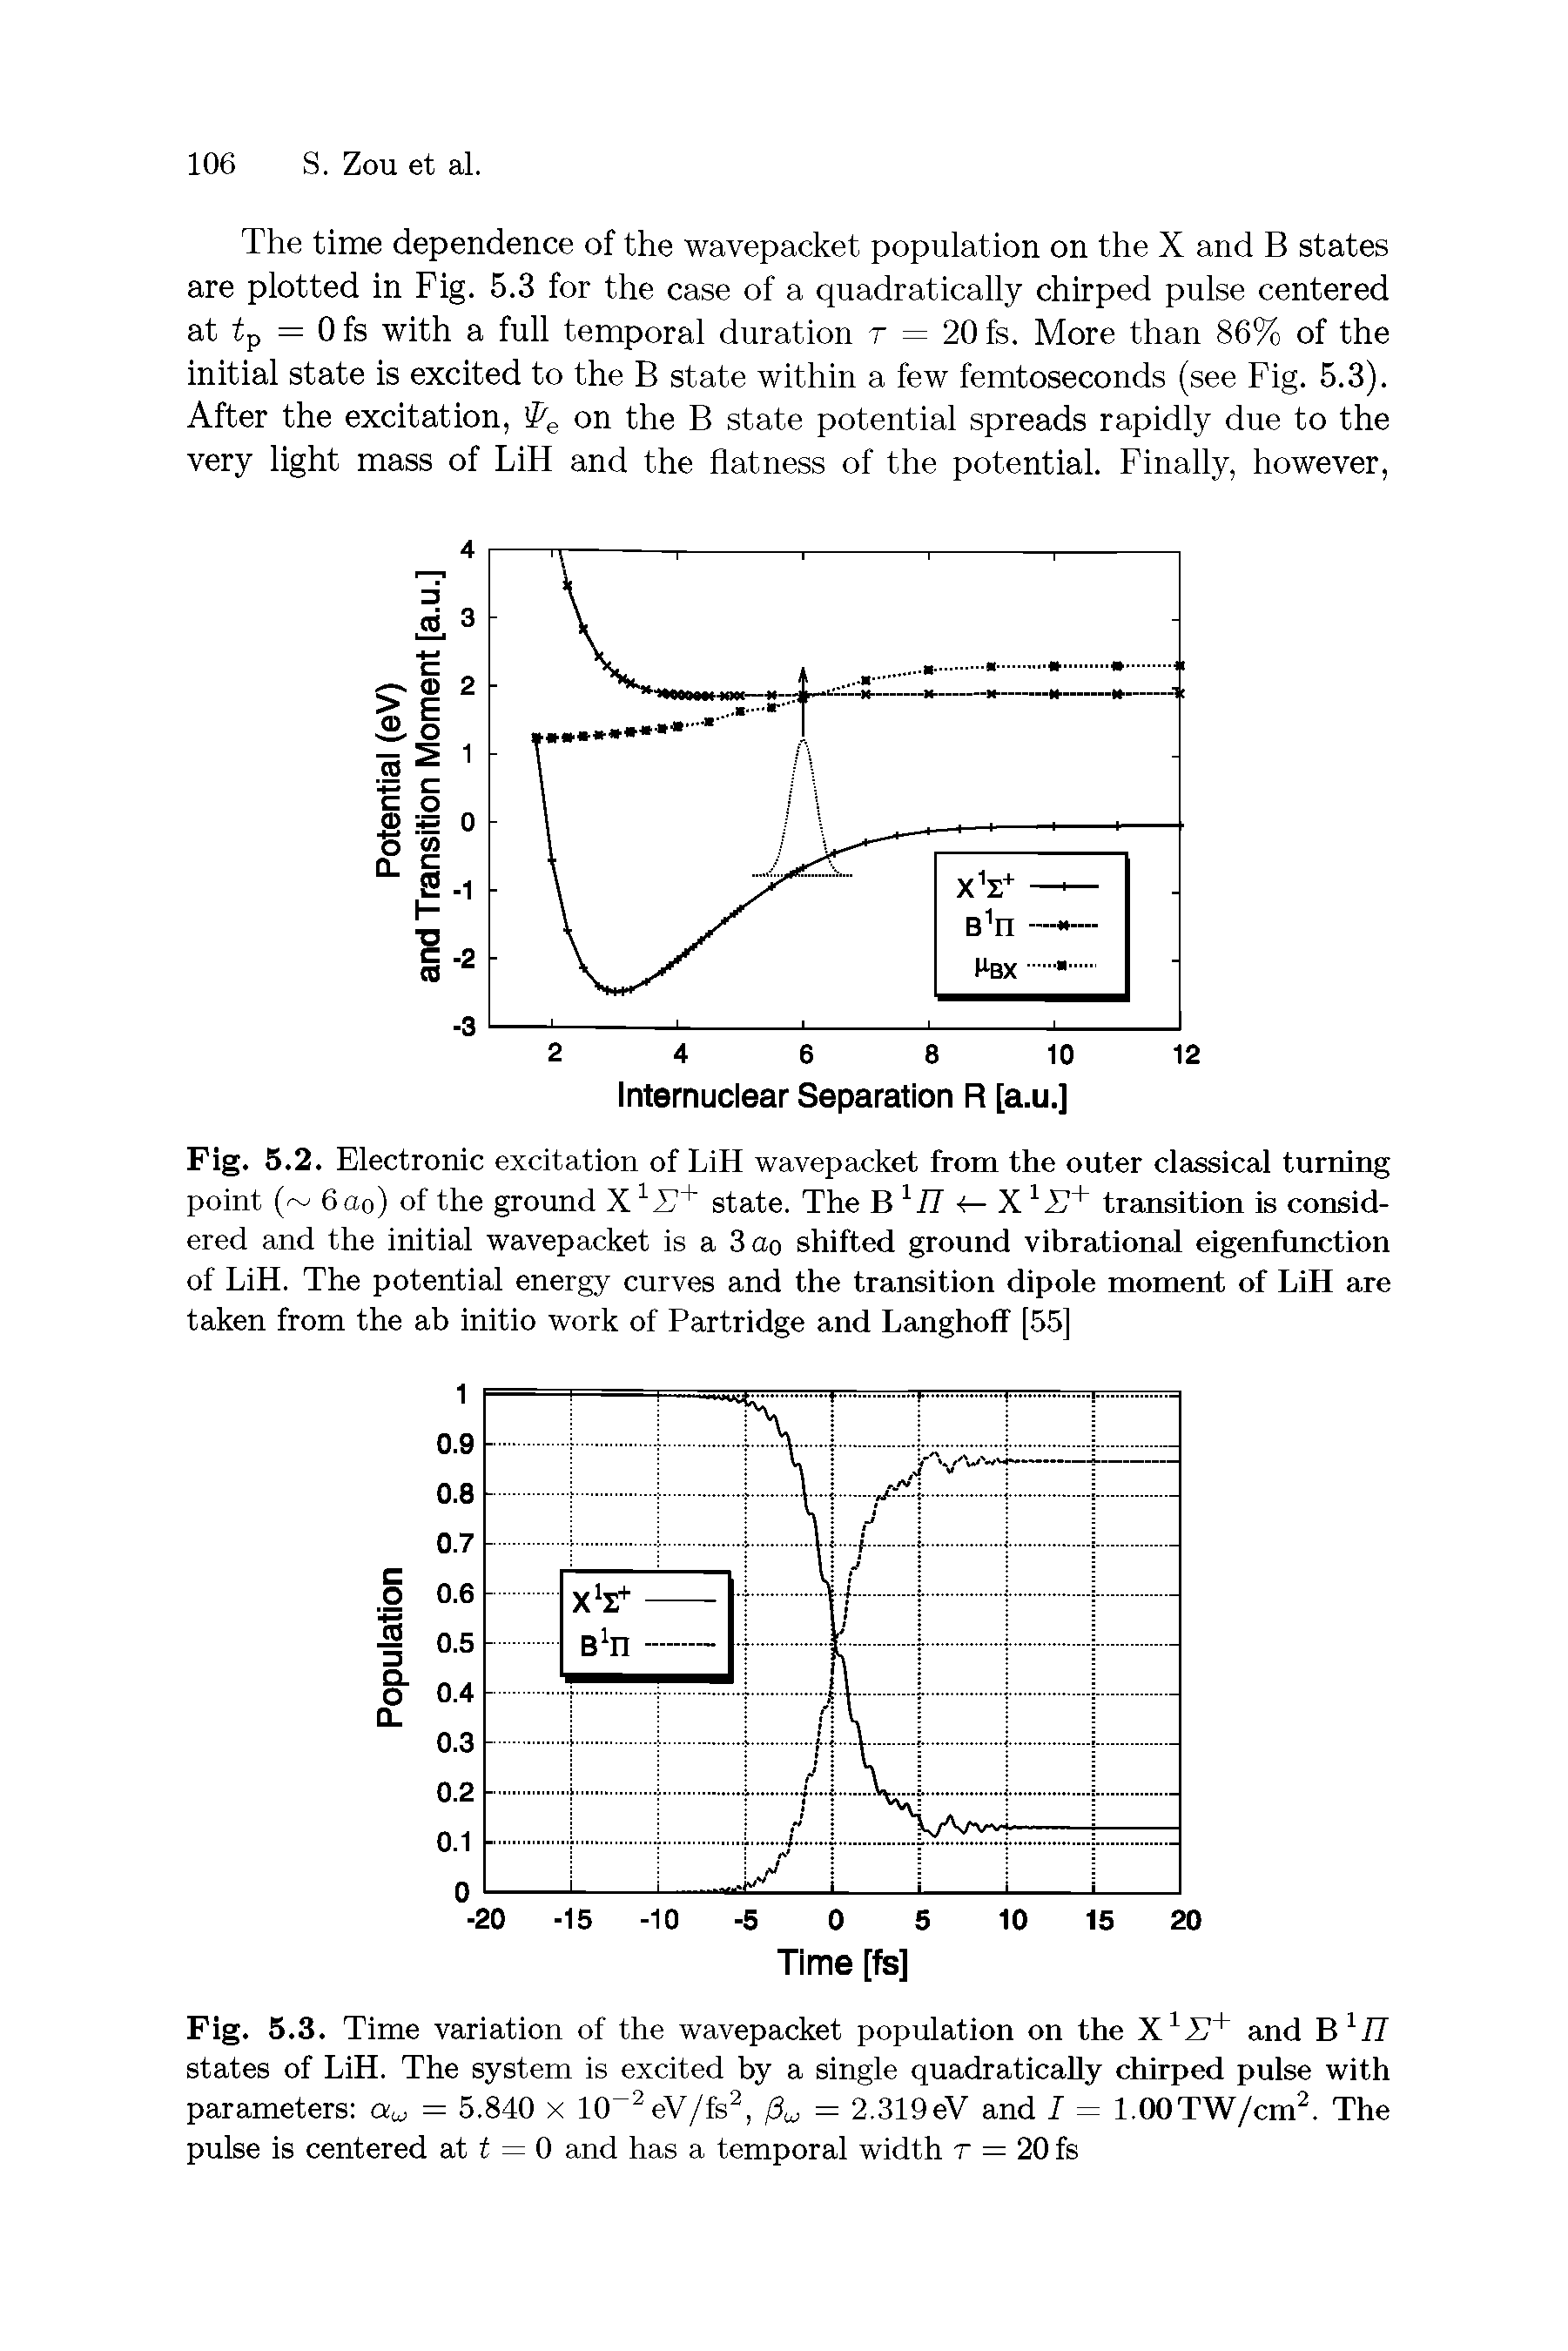 Fig. 5.2. Electronic excitation of LiH wavepacket from the outer classical turning point ( 6 a0) of the ground X1L7+ state. The B 1J7 X 1S+ transition is considered and the initial wavepacket is a 3ao shifted ground vibrational eigenfunction of LiH. The potential energy curves and the transition dipole moment of LiH are taken from the ab initio work of Partridge and Langhoff [55]...